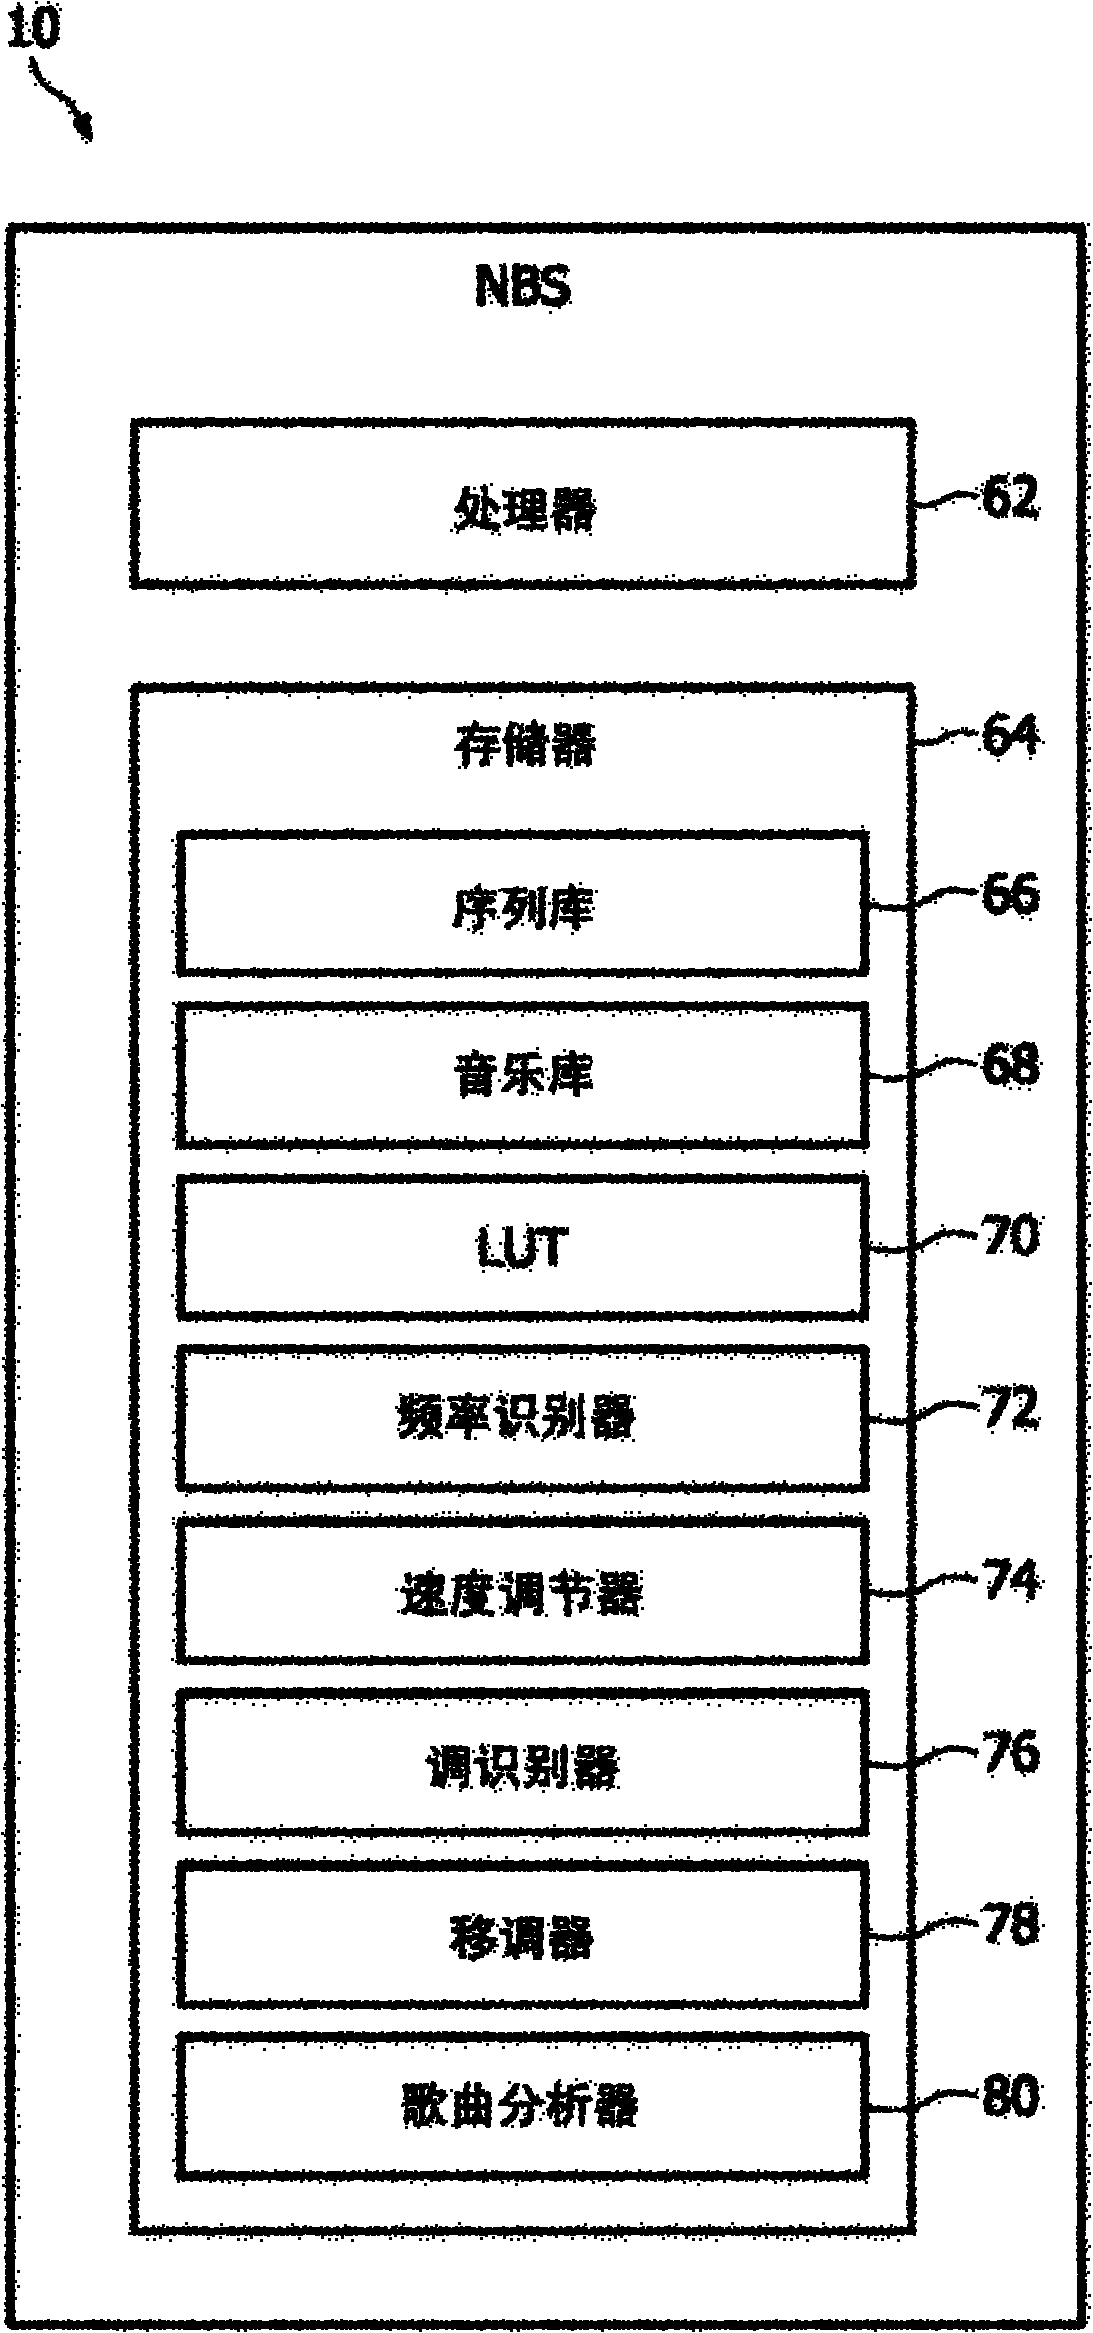 Gradient coil noise masking for MRI device